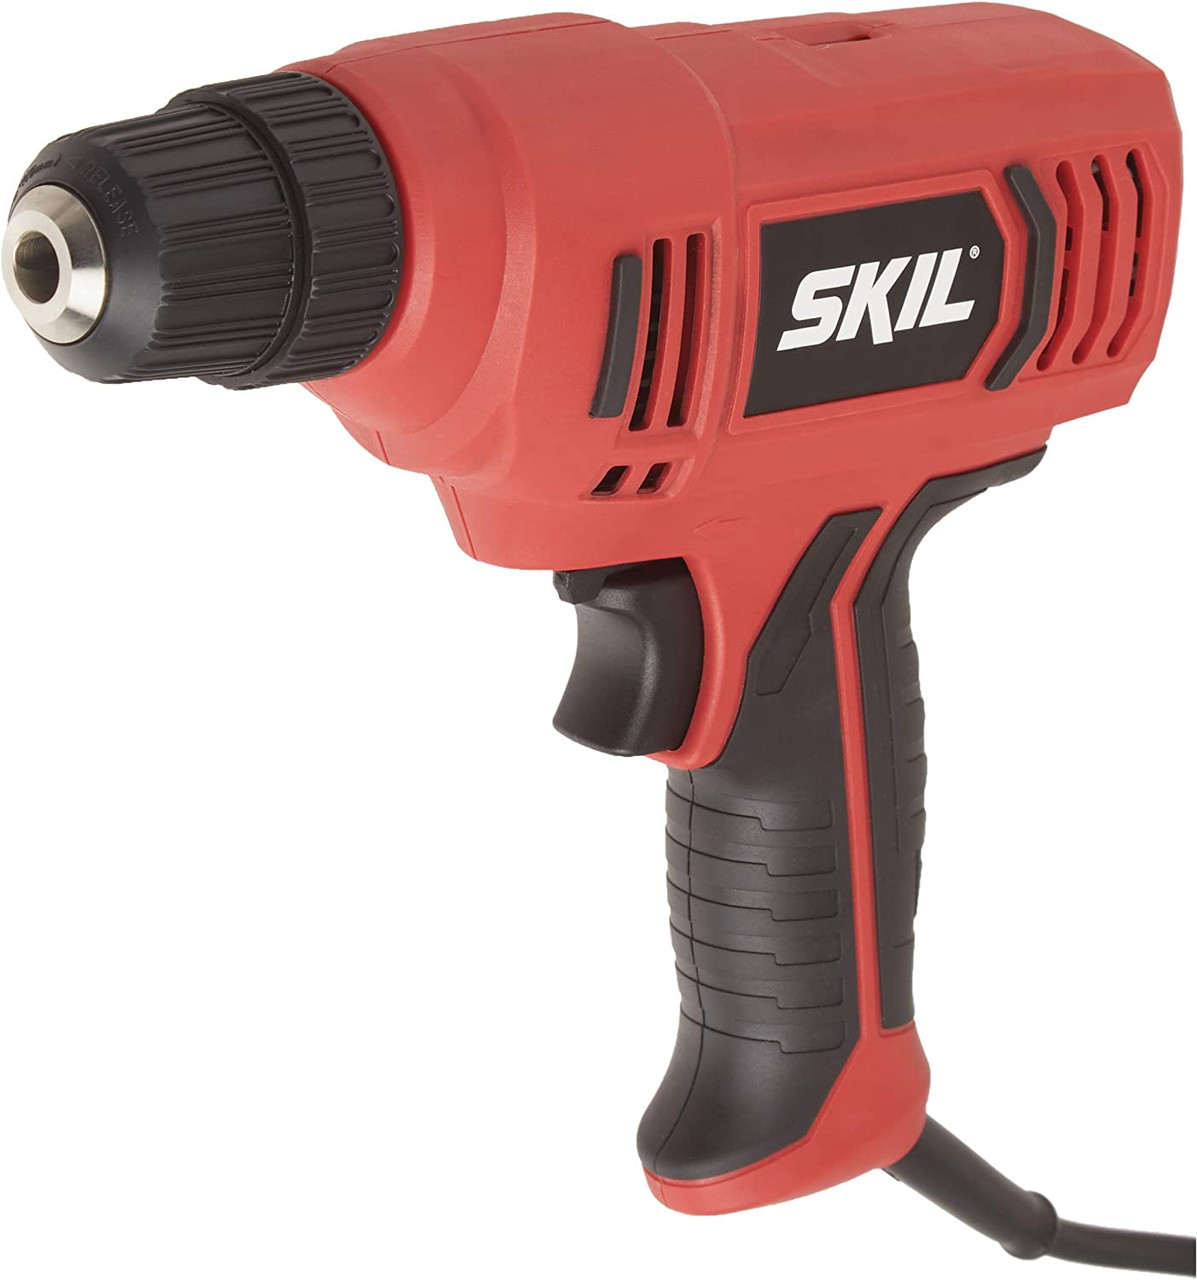 Skil 6239-01 5.5 AMP Corded 3/8-Inch Variable Speed Drill JB Tools